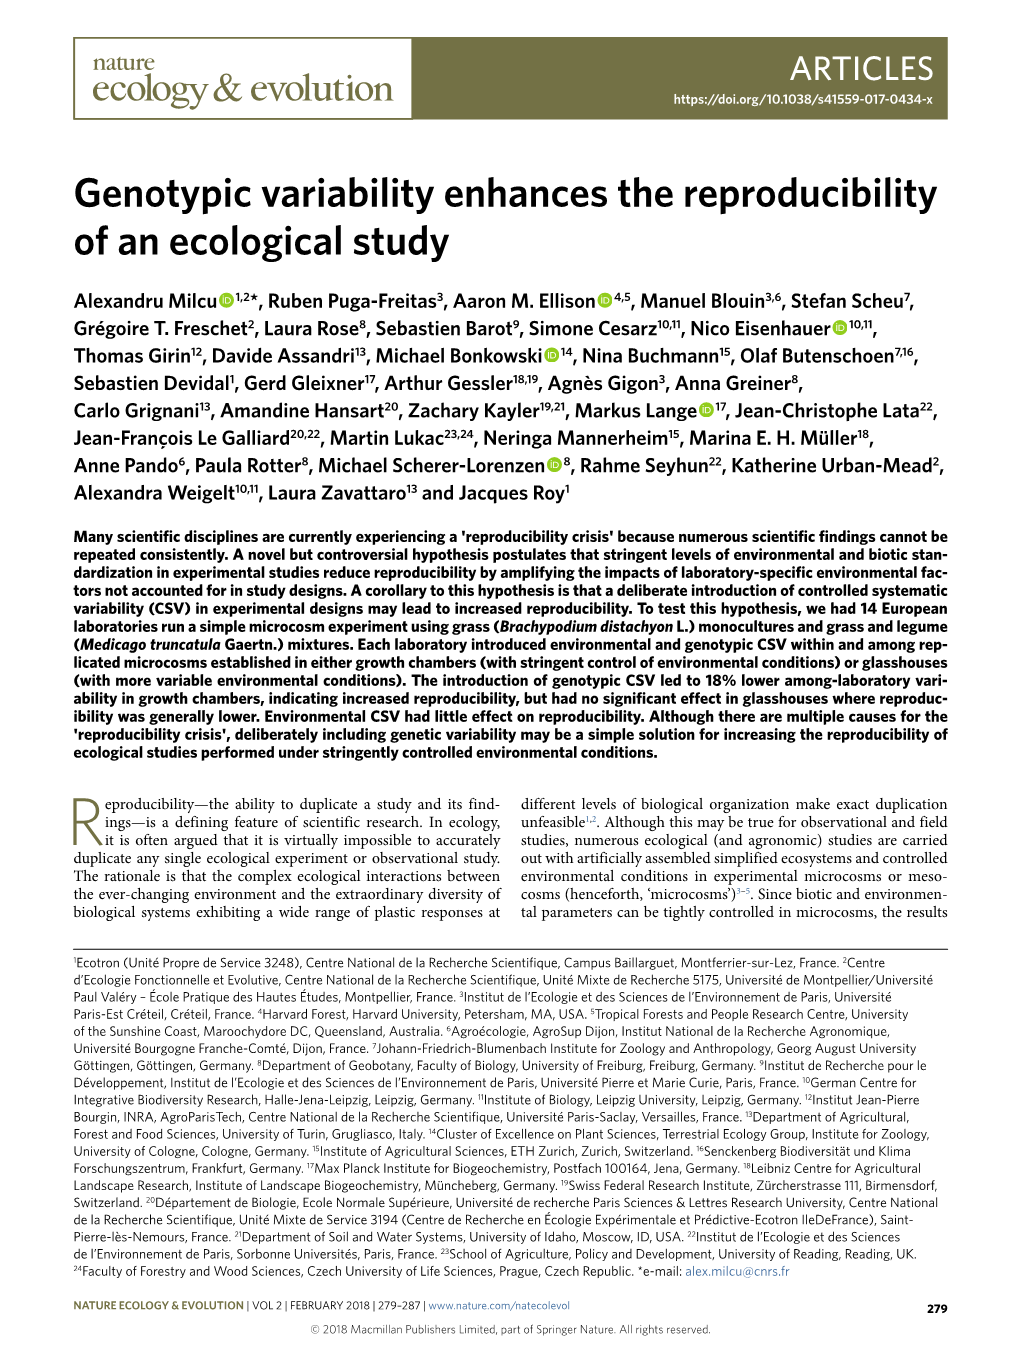 Genotypic Variability Enhances the Reproducibility of an Ecological Study